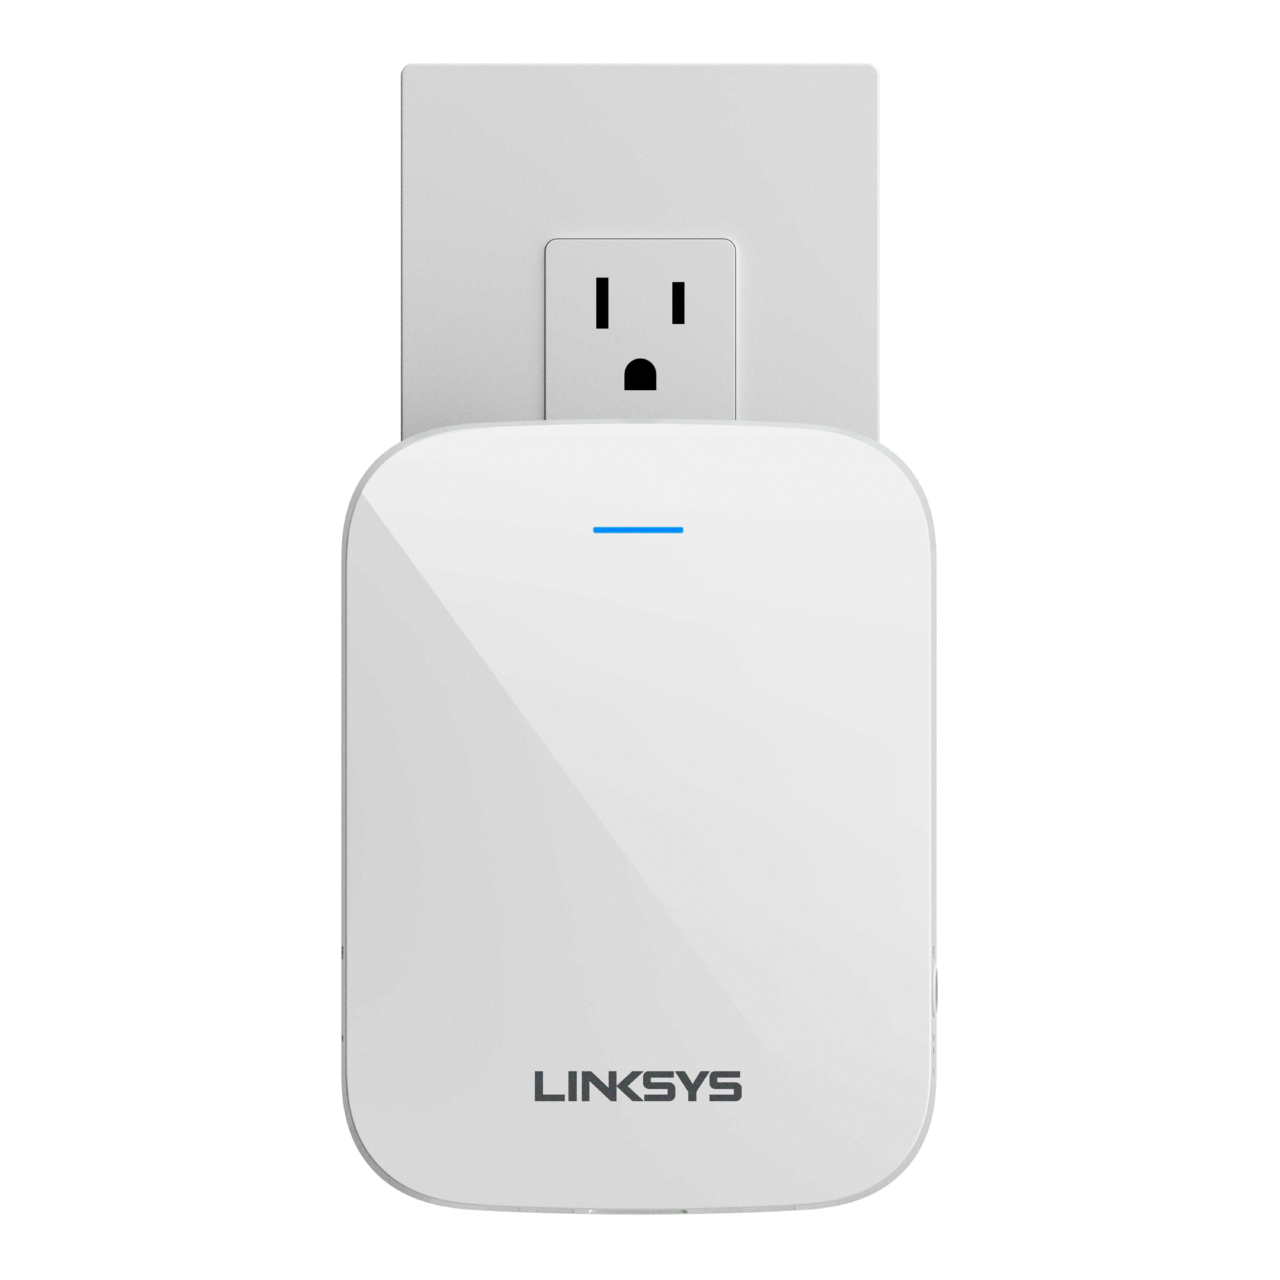 Maiden Hændelse, begivenhed Army Dual-Band WiFi 6 Range Extender (AX1800) | Linksys | Linksys: US